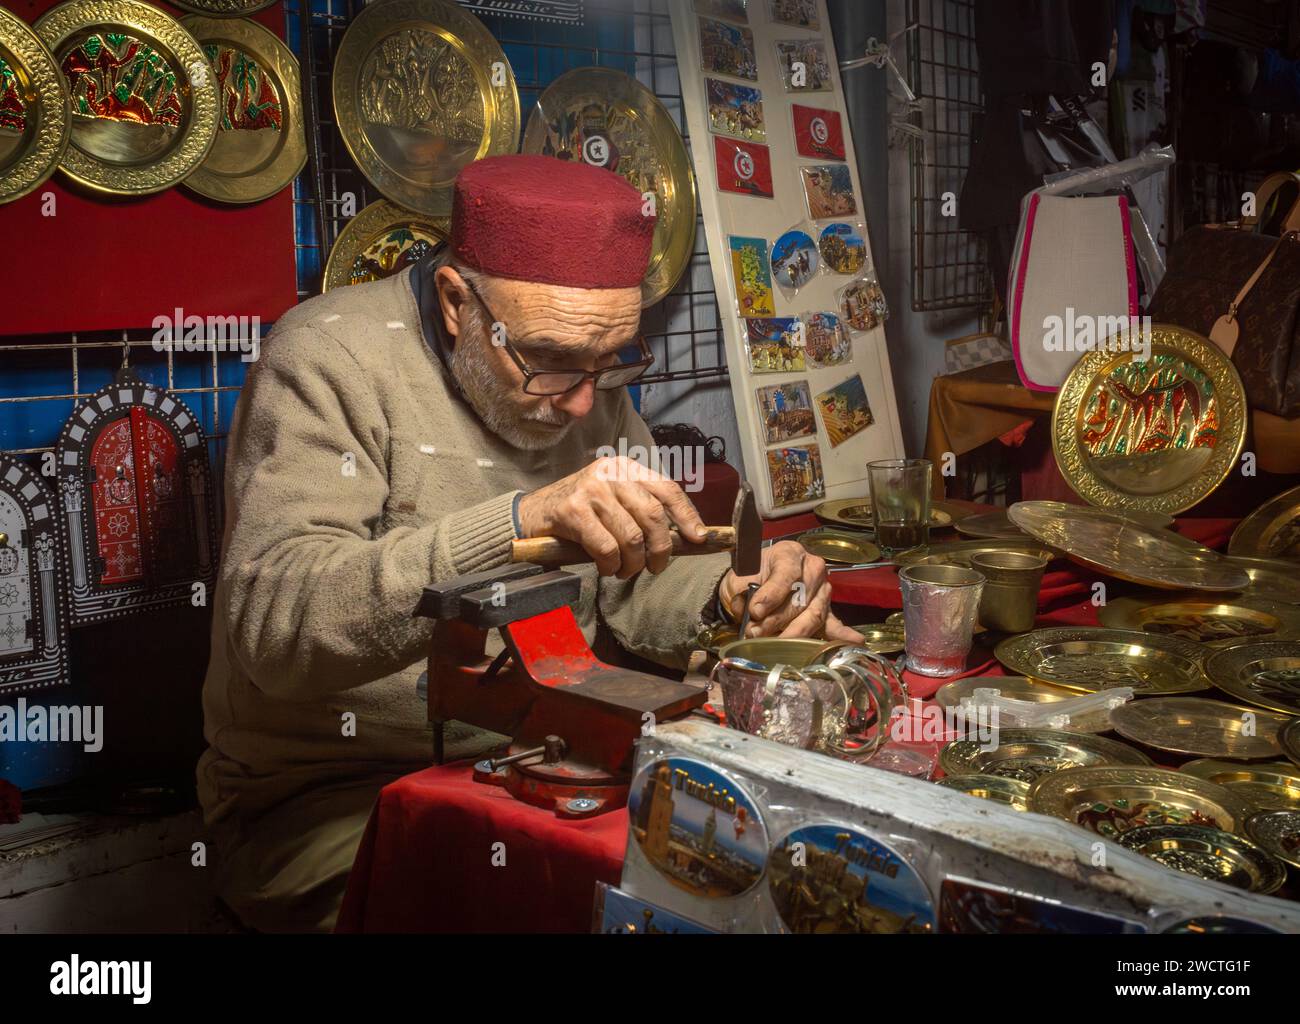 A metal working craftsman wearing a fez hat uses a hammer at his tourist souvenir stall within the souk inthe ancient medina in Sousse, Tunisia. The m Stock Photo